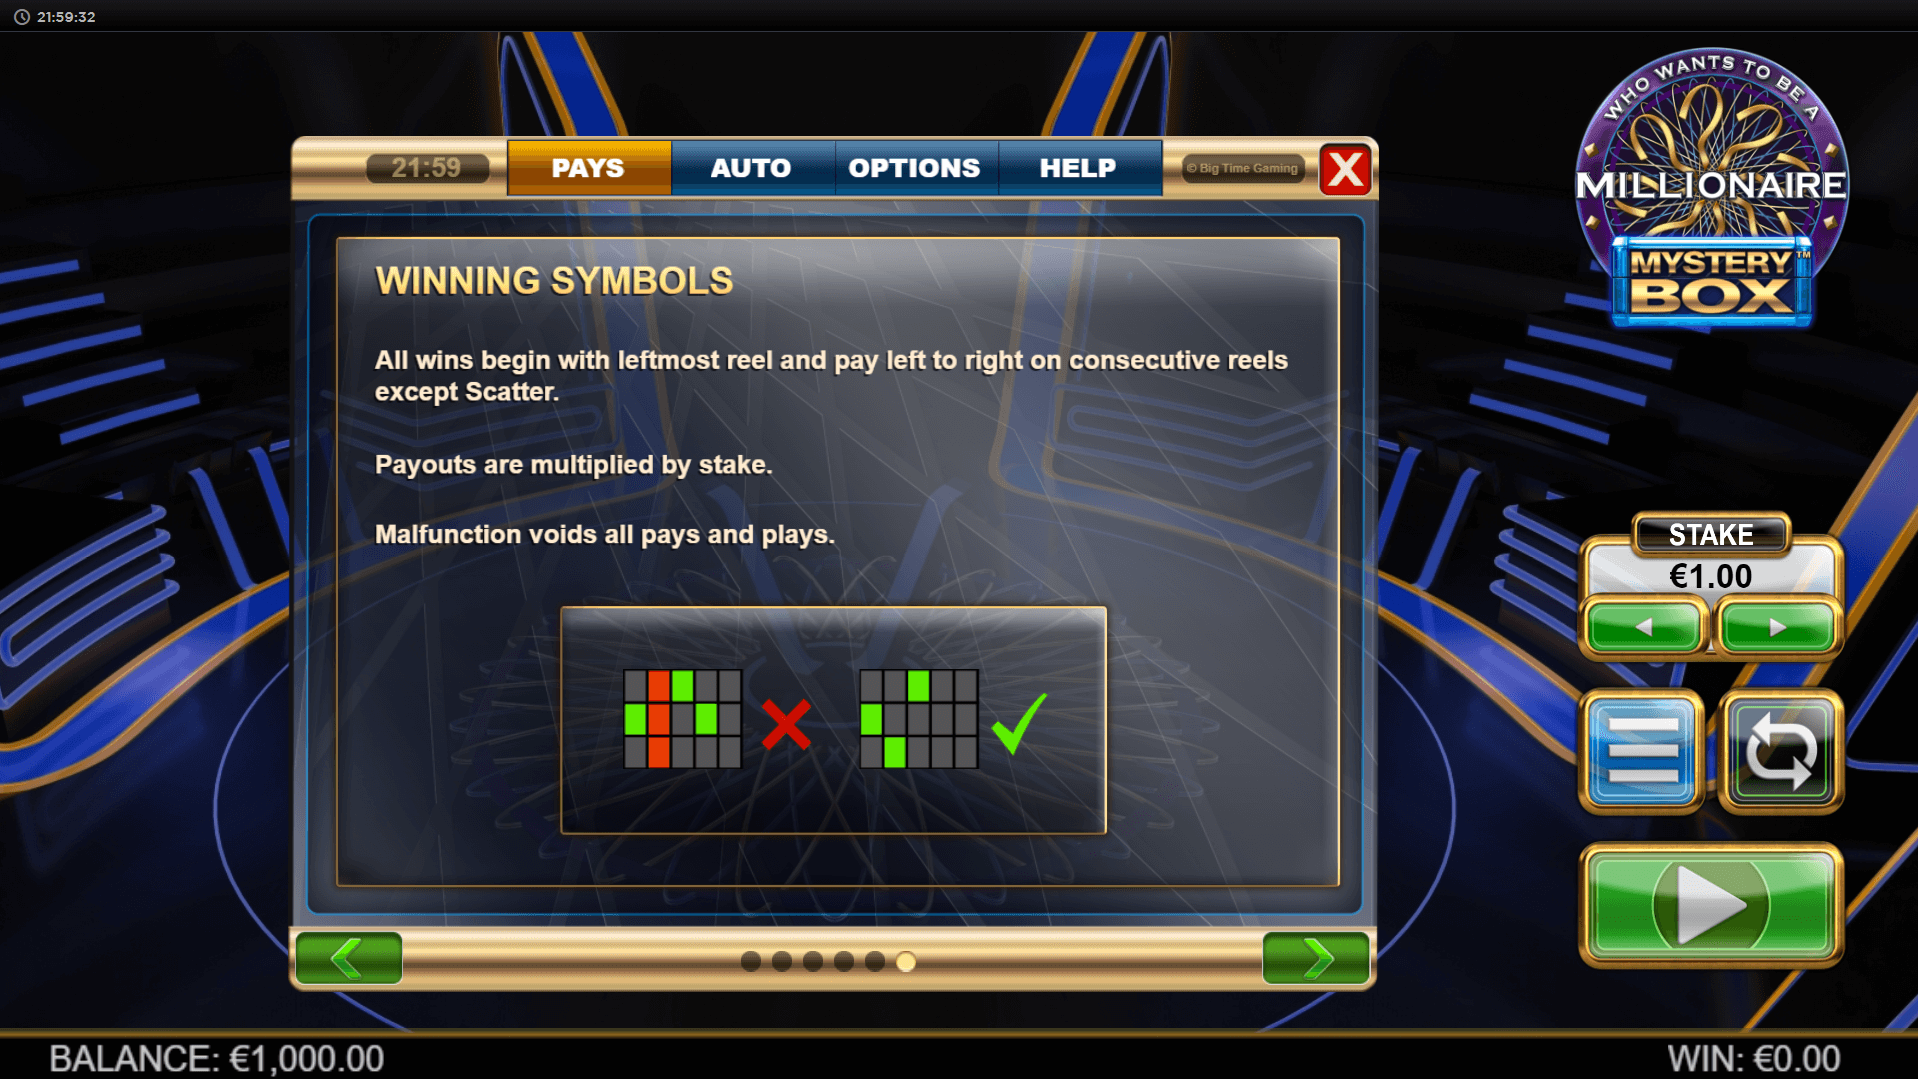 who wants to be a millionaire: mystery box slot machine detail image 5